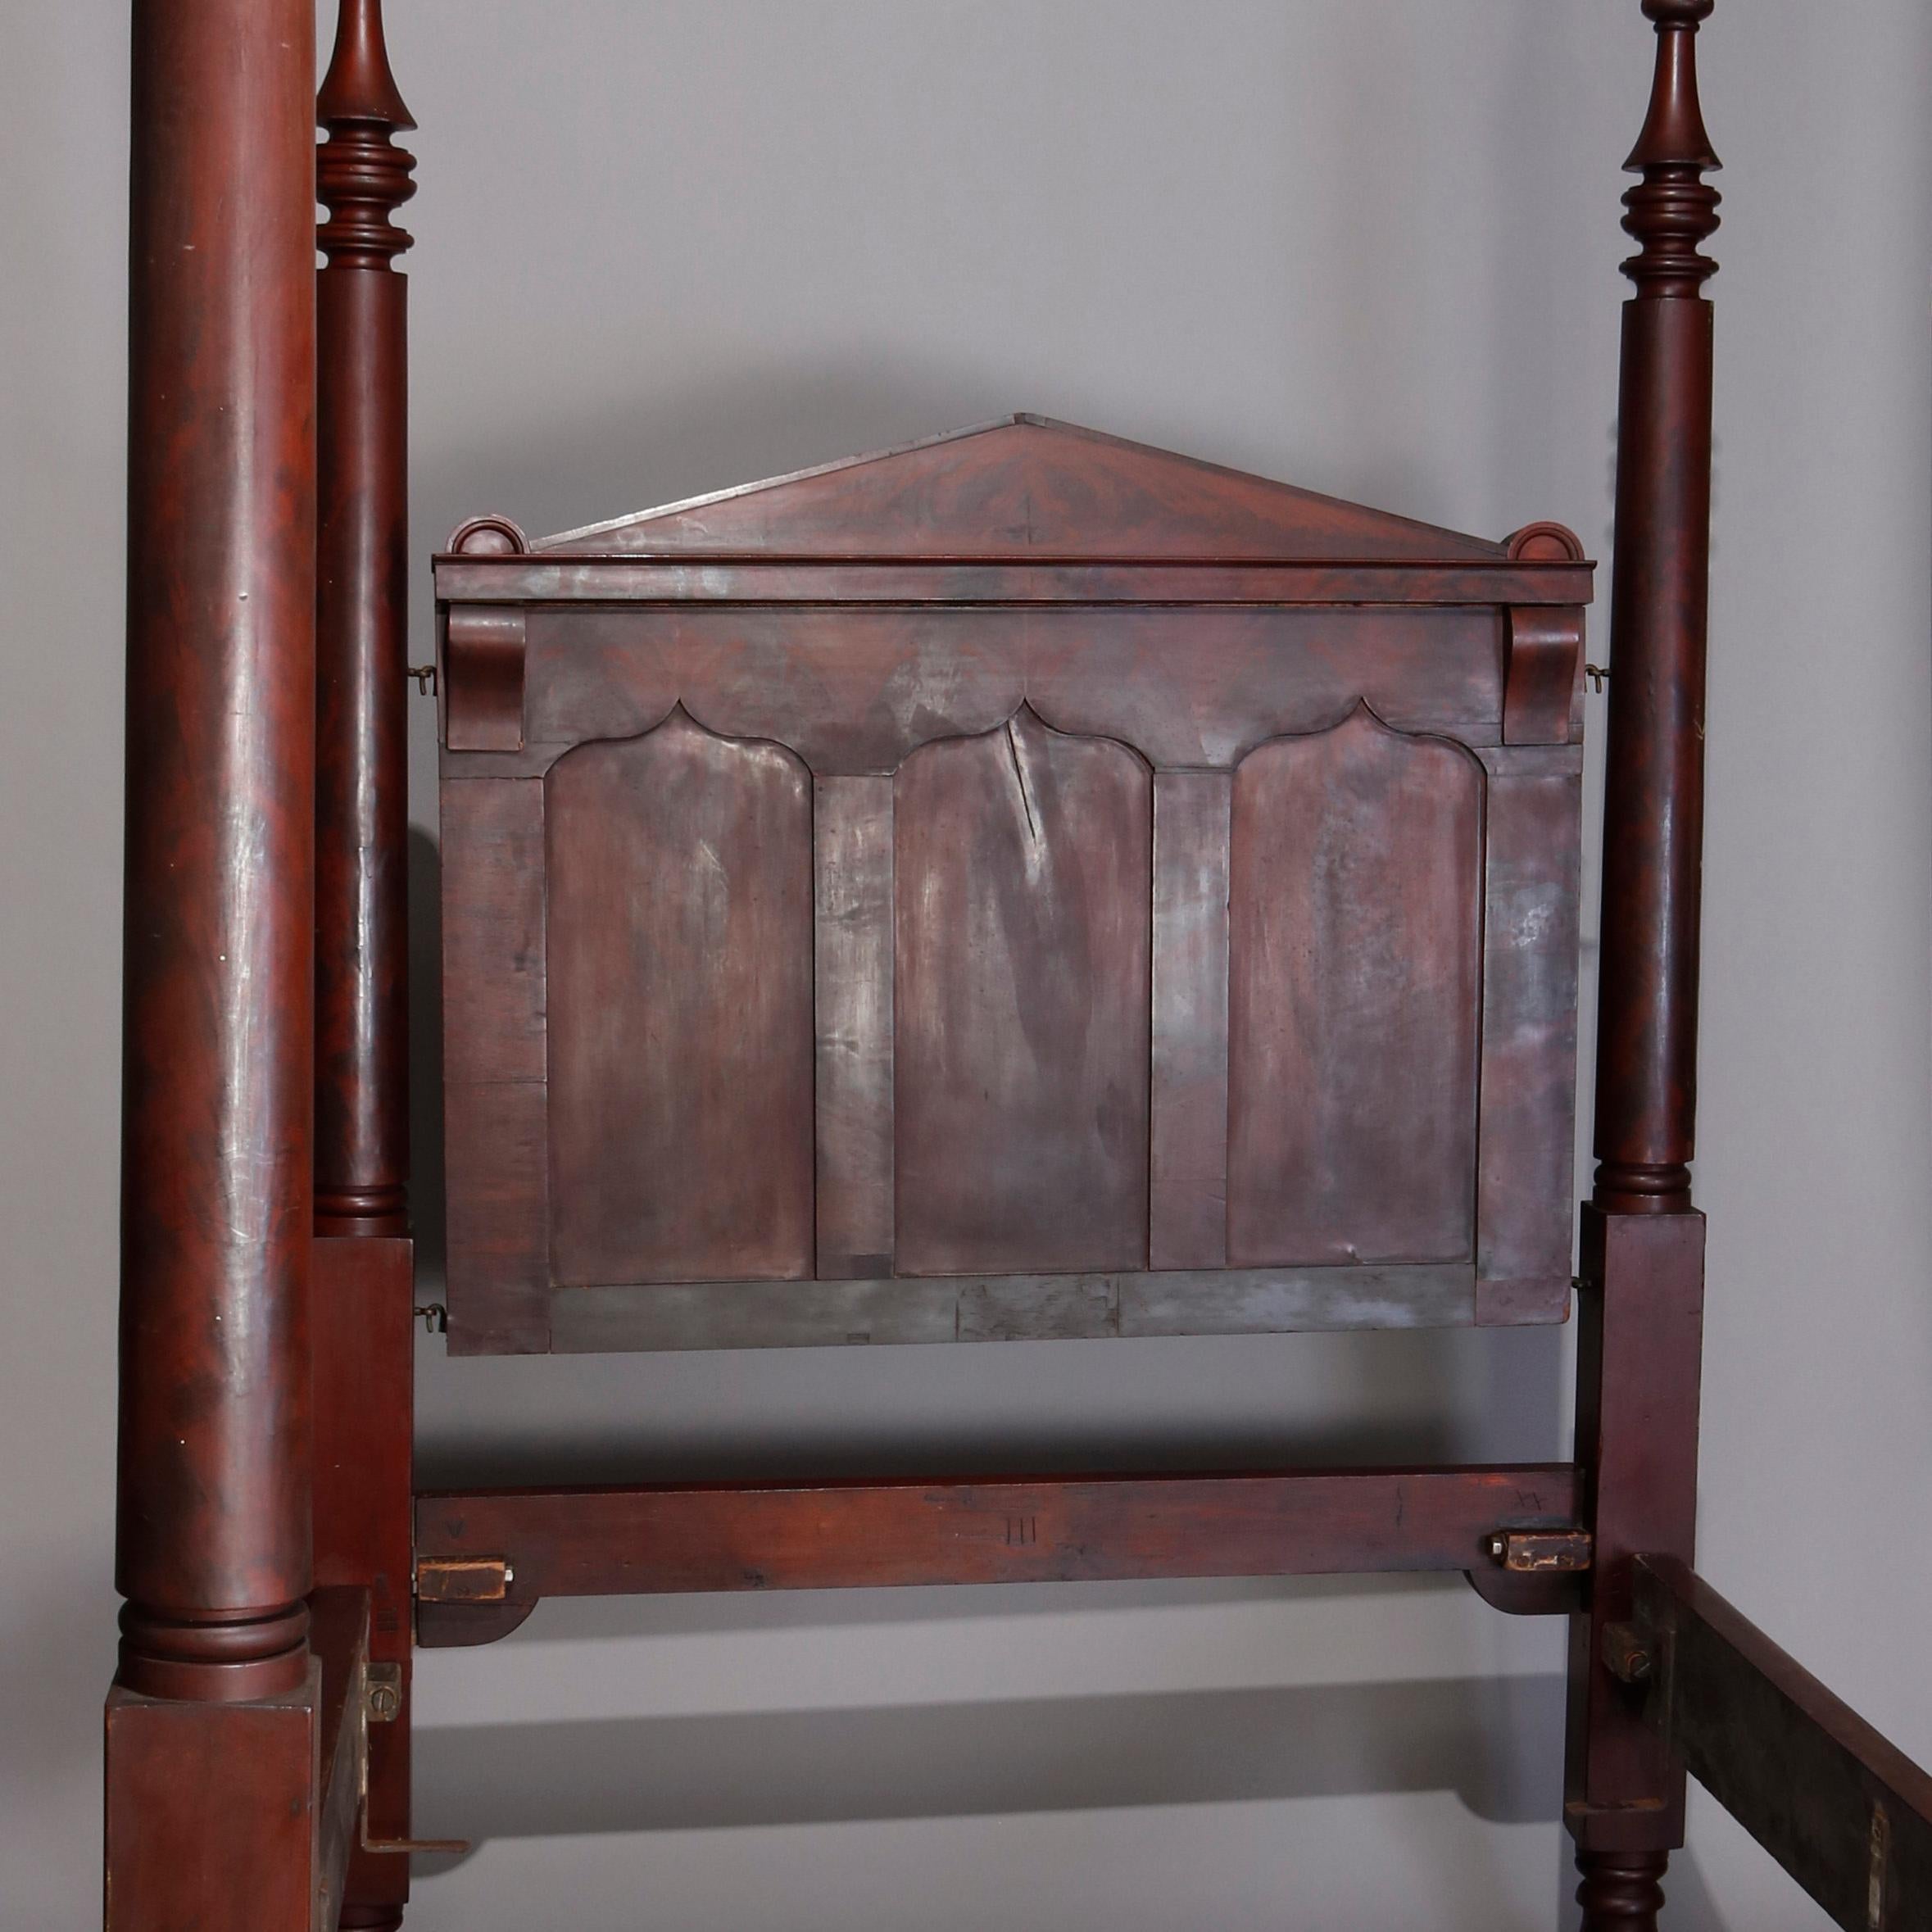 An American Empire Quervelle school tester poster bed offers flame mahogany construction with architectural paneled headboard and turned posts surmounted by spire form finials, accepts full size mattress, circa 1840

***DELIVERY NOTICE – Due to